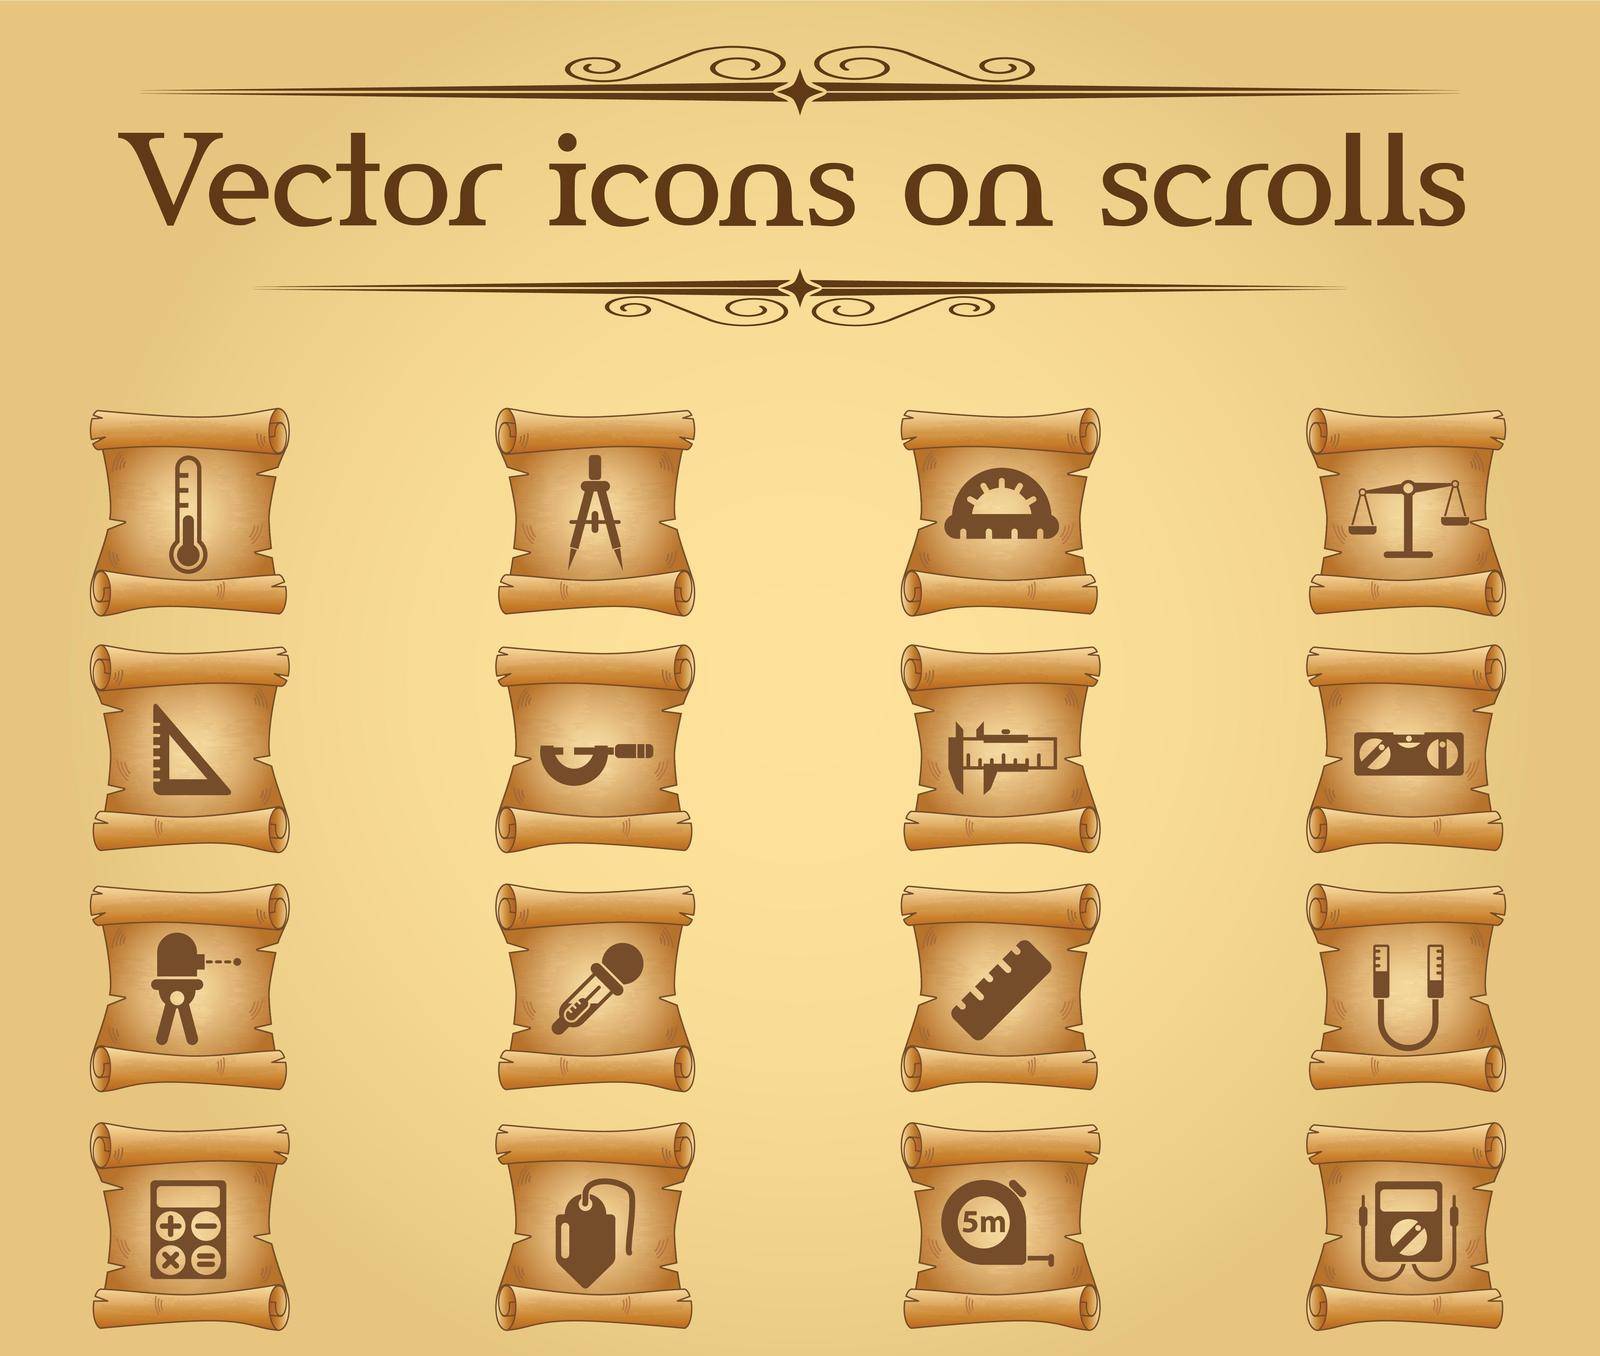 measuring tools vector icons on scrolls for your creative ideas